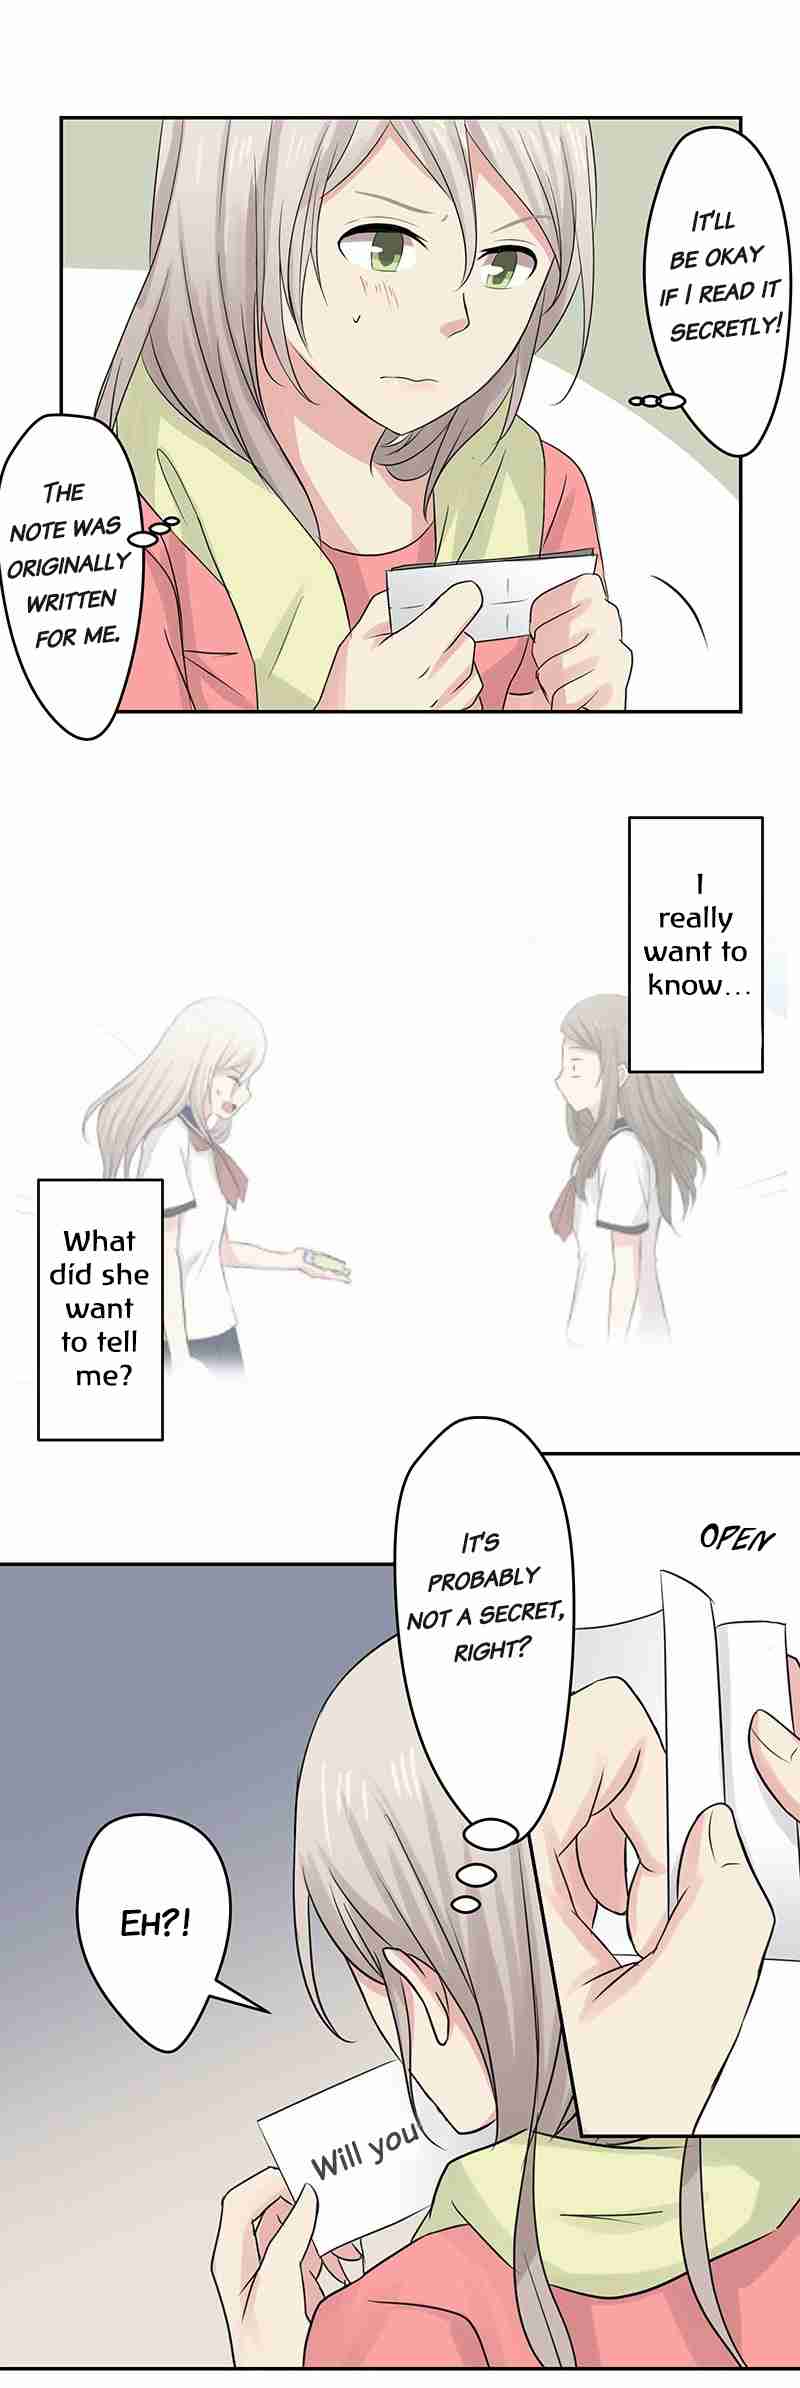 Switched Girls Ch. 9 About Mei Sia (Second Half)